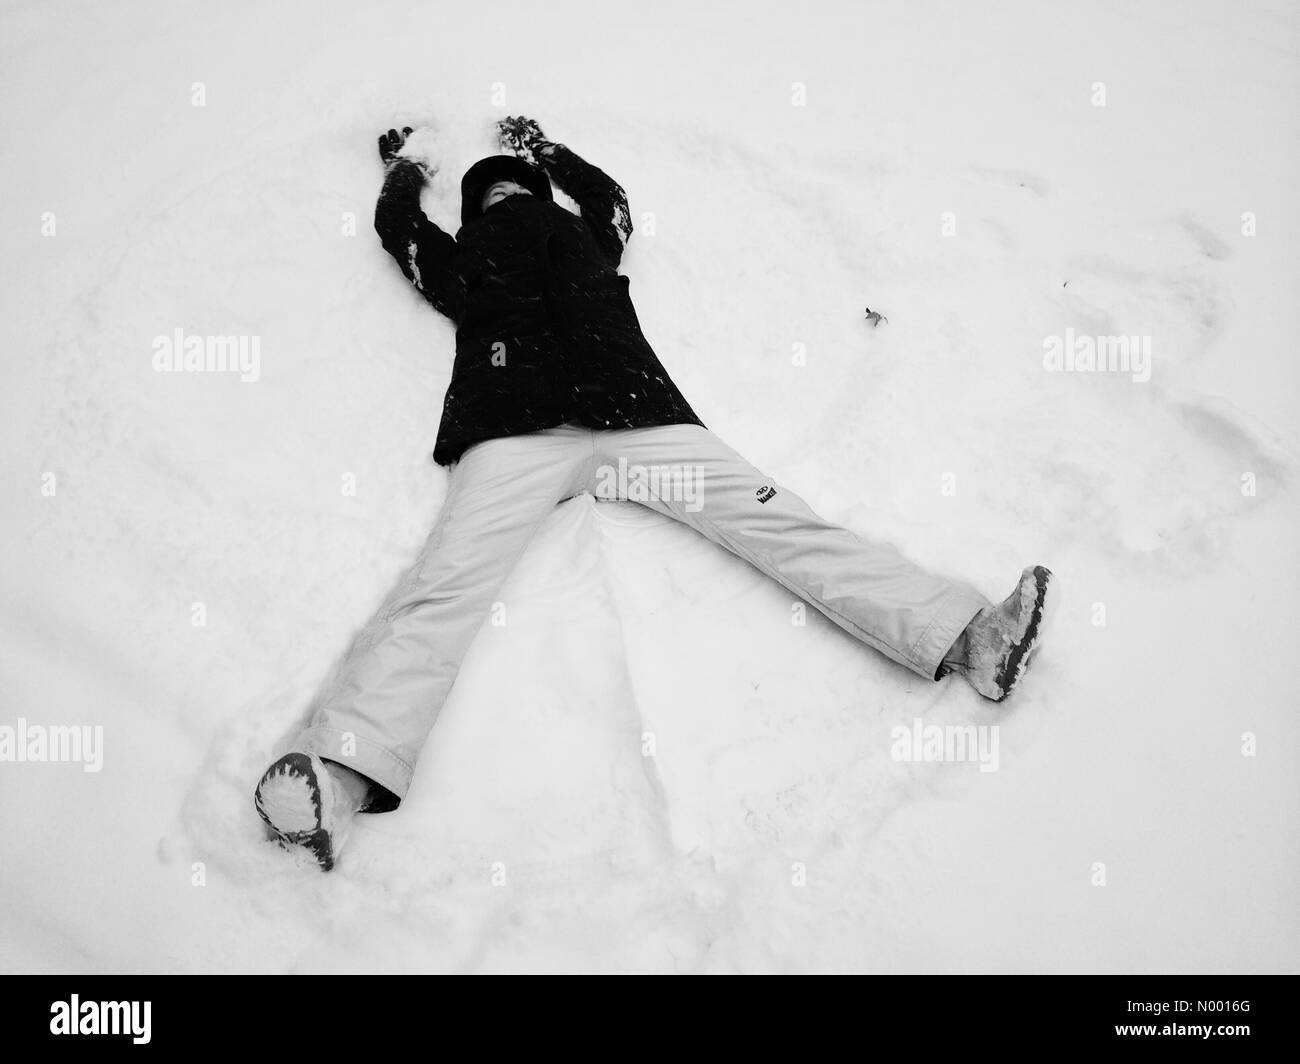 Having fun making snow angels during the snowstorm in New Jersey, USA. Stock Photo